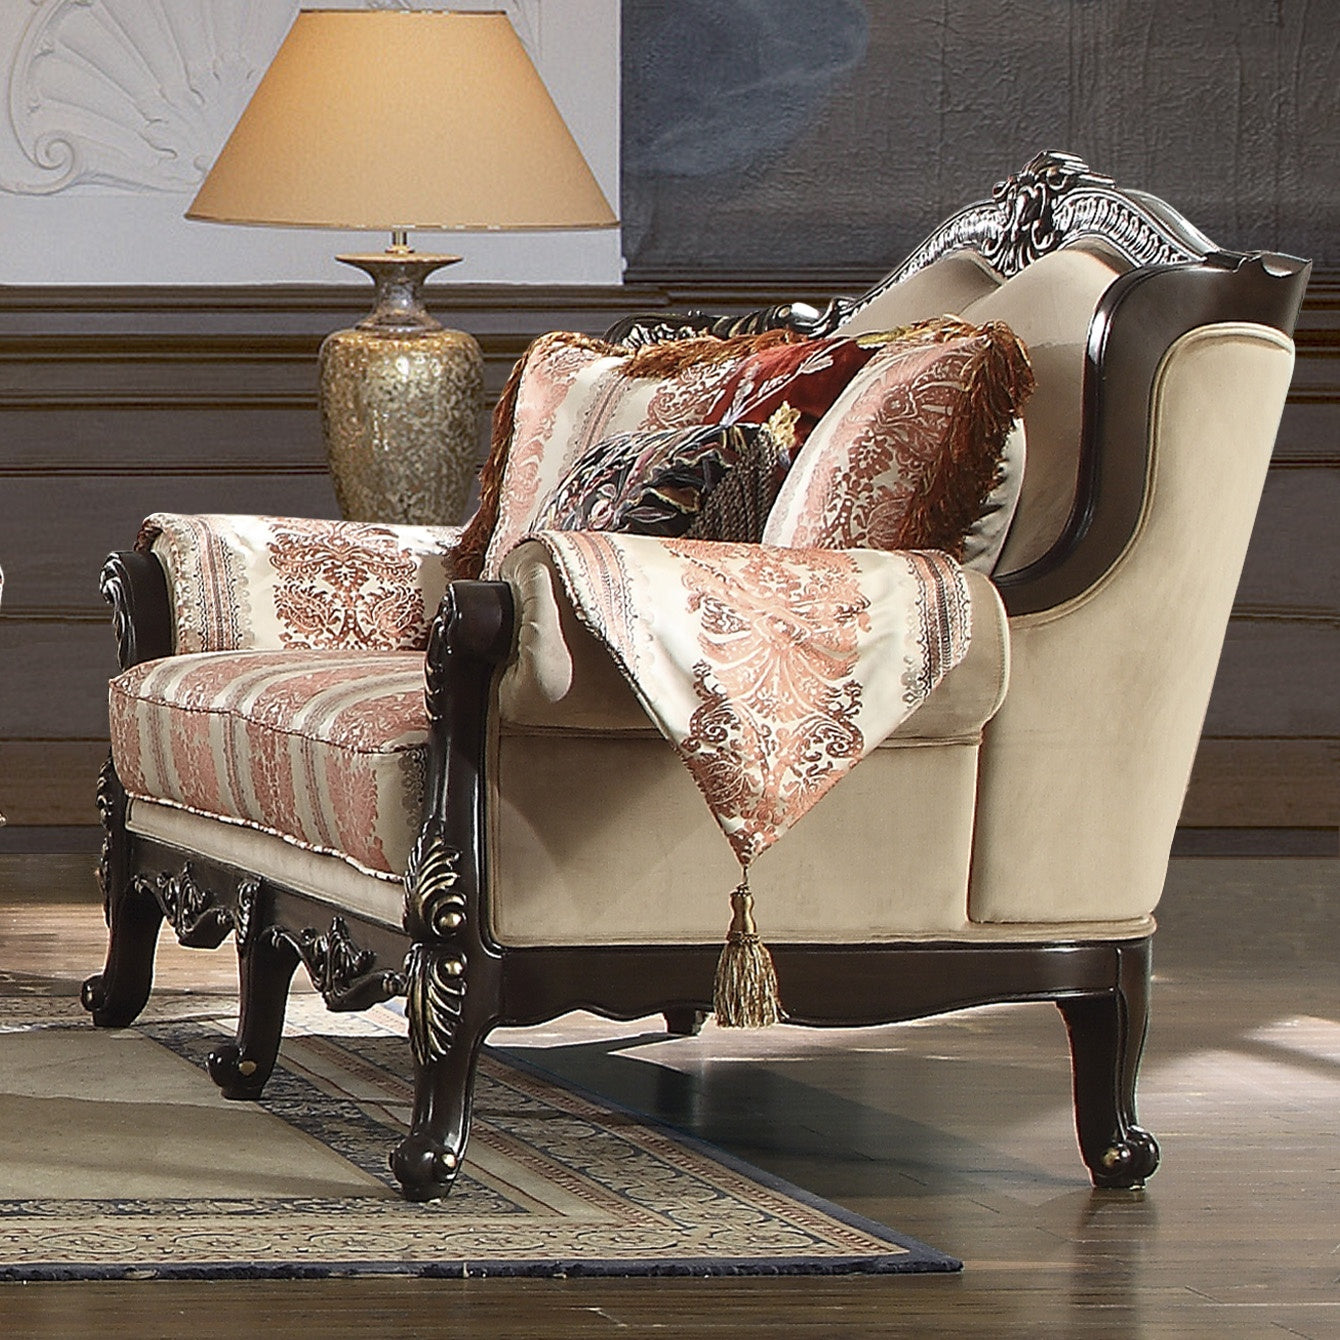 Fabric Loveseat in Brown Mahogany Finish L2638 European Traditional Victorian